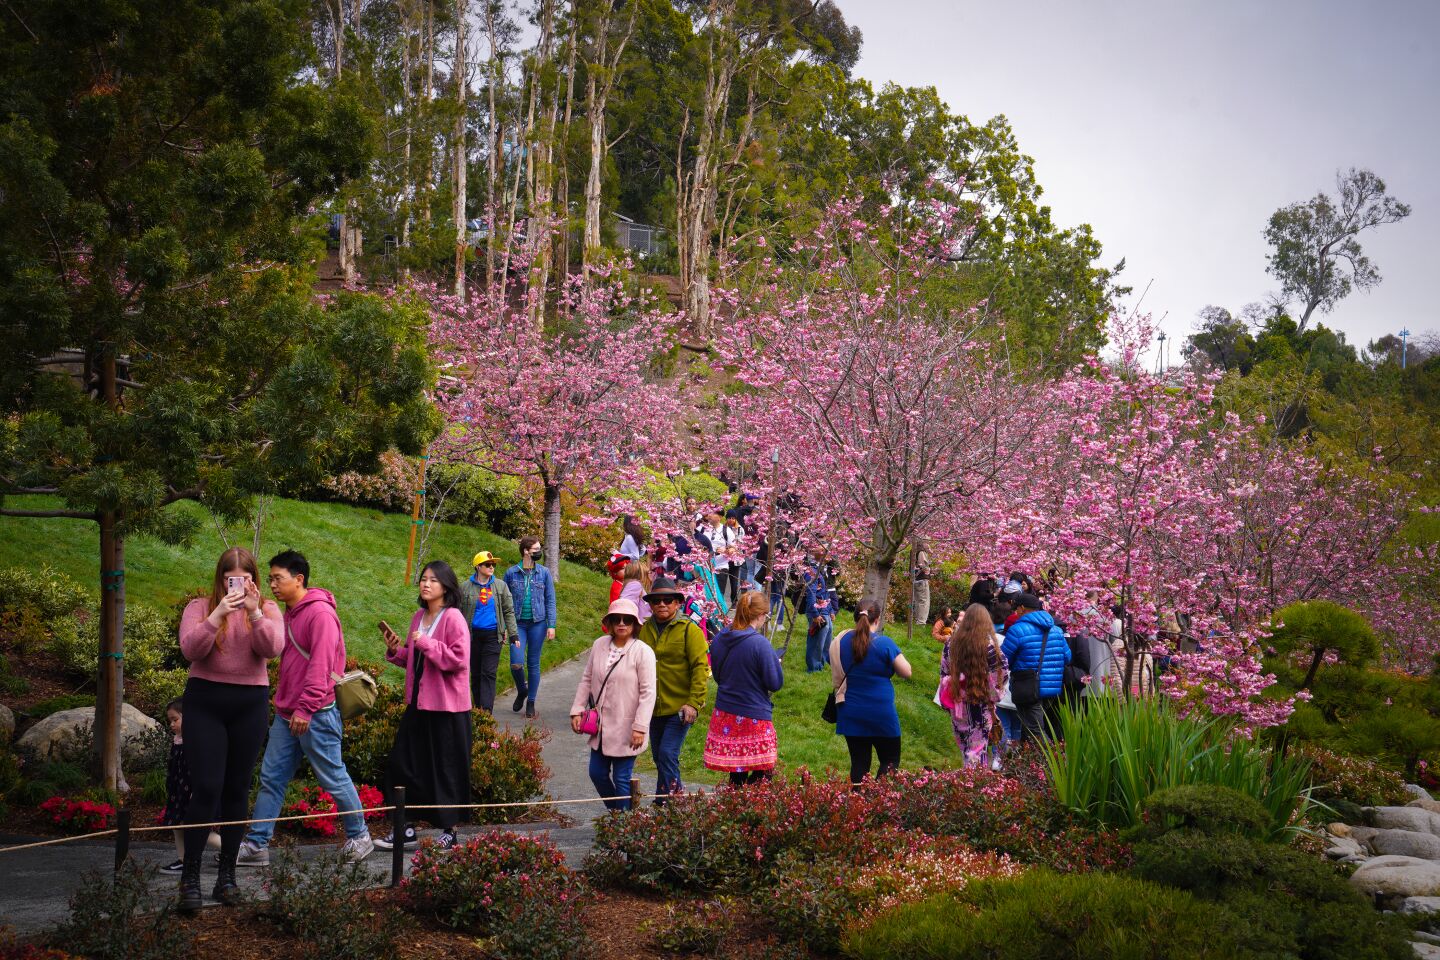 Guests enjoy this year’s Cherry Blossom Festival at the Japanese Friendship Garden on Saturday, March 11, 2023 in San Diego, CA.